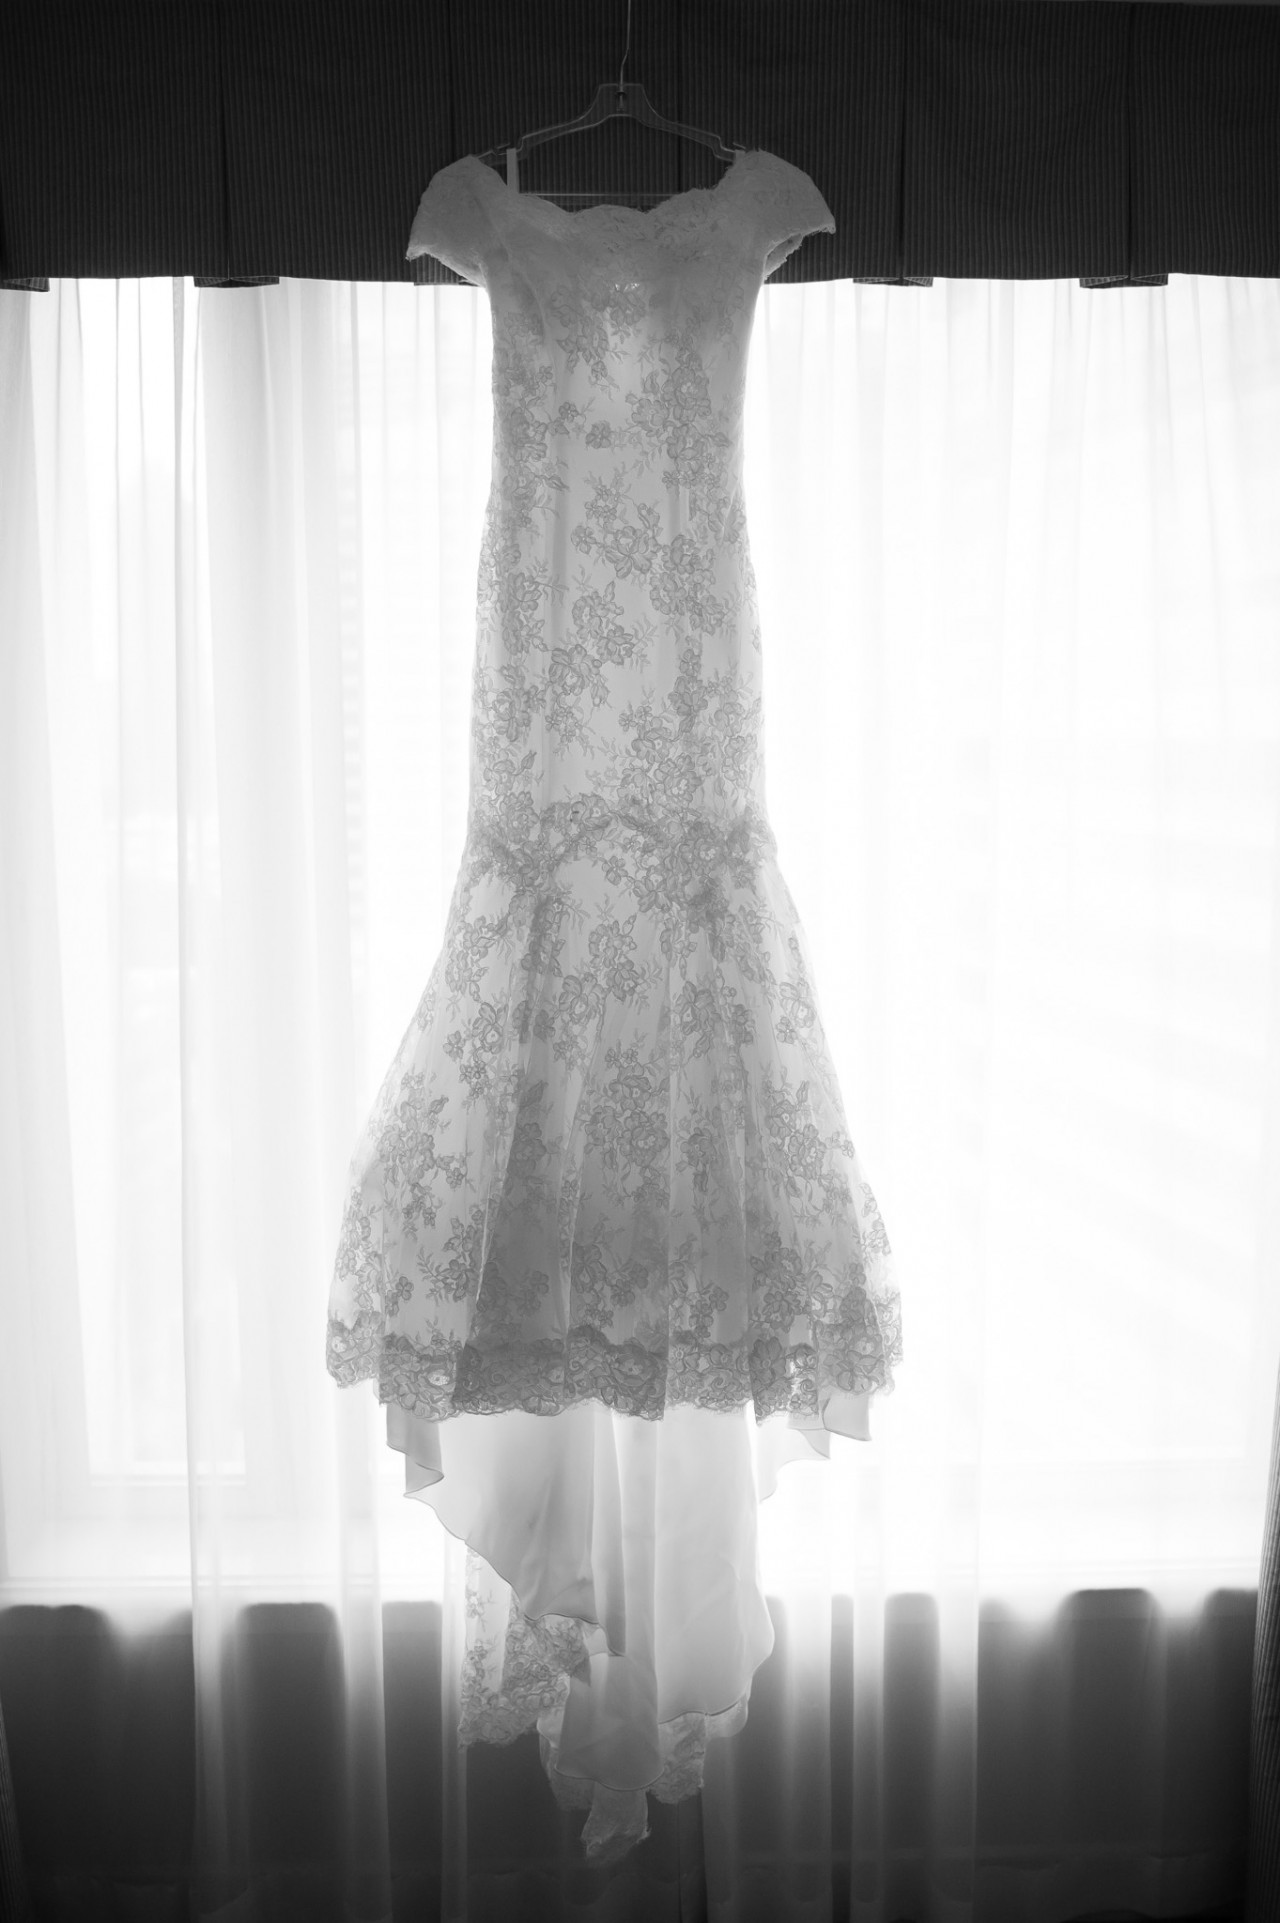 Tish's wedding dress on display backlit in their hotel room at the Marriott Brisbane